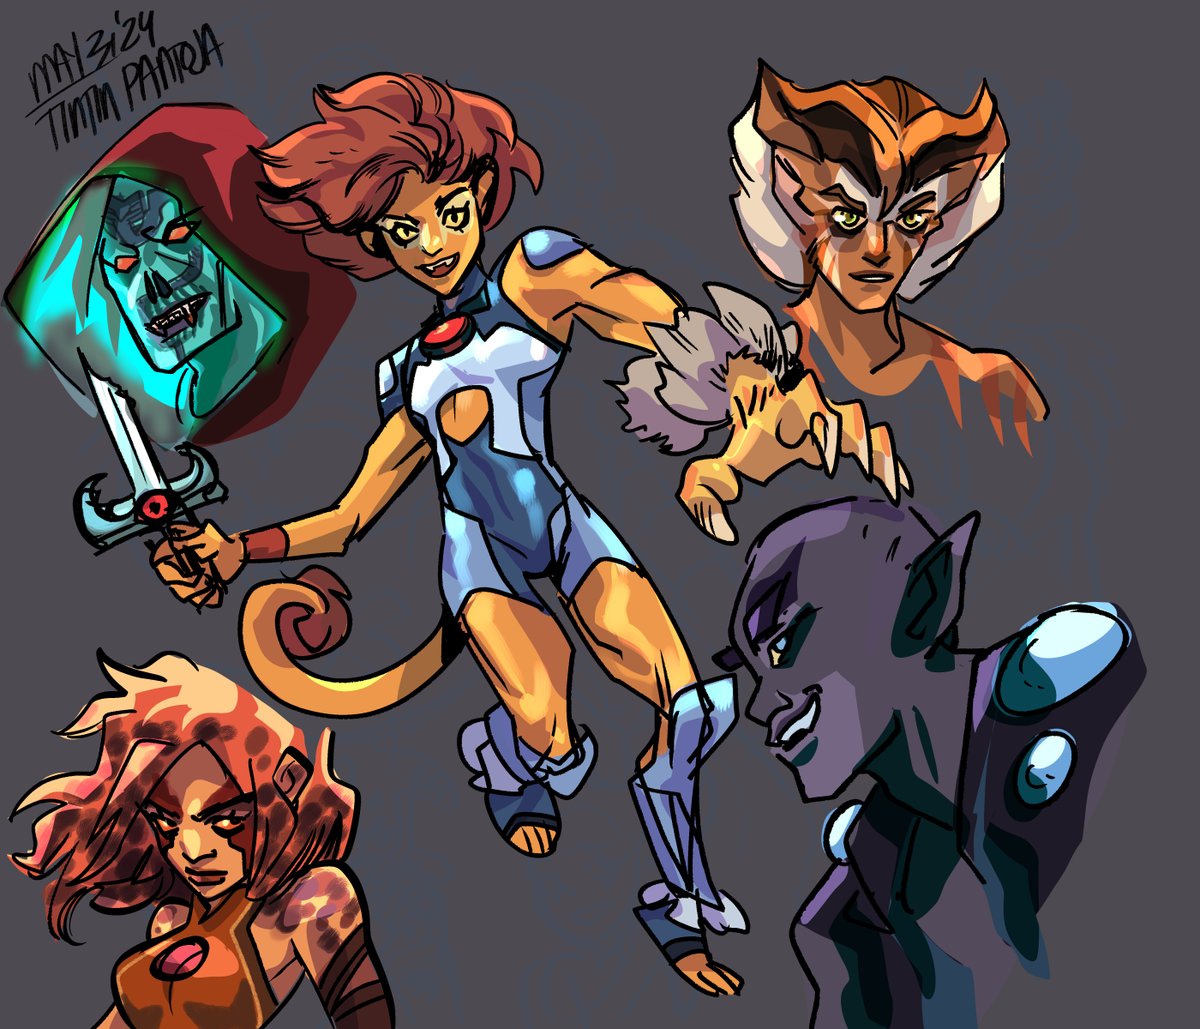 Cat People in Space. More '80s fun! I'm a late-era Gen X nerd who loved all those trashy toy commercial-yeah, Thundercats! I love to put my own spin on the designs. Just trying to get back into drawing, so I'm attempting to revive my digital sketchbook habit.